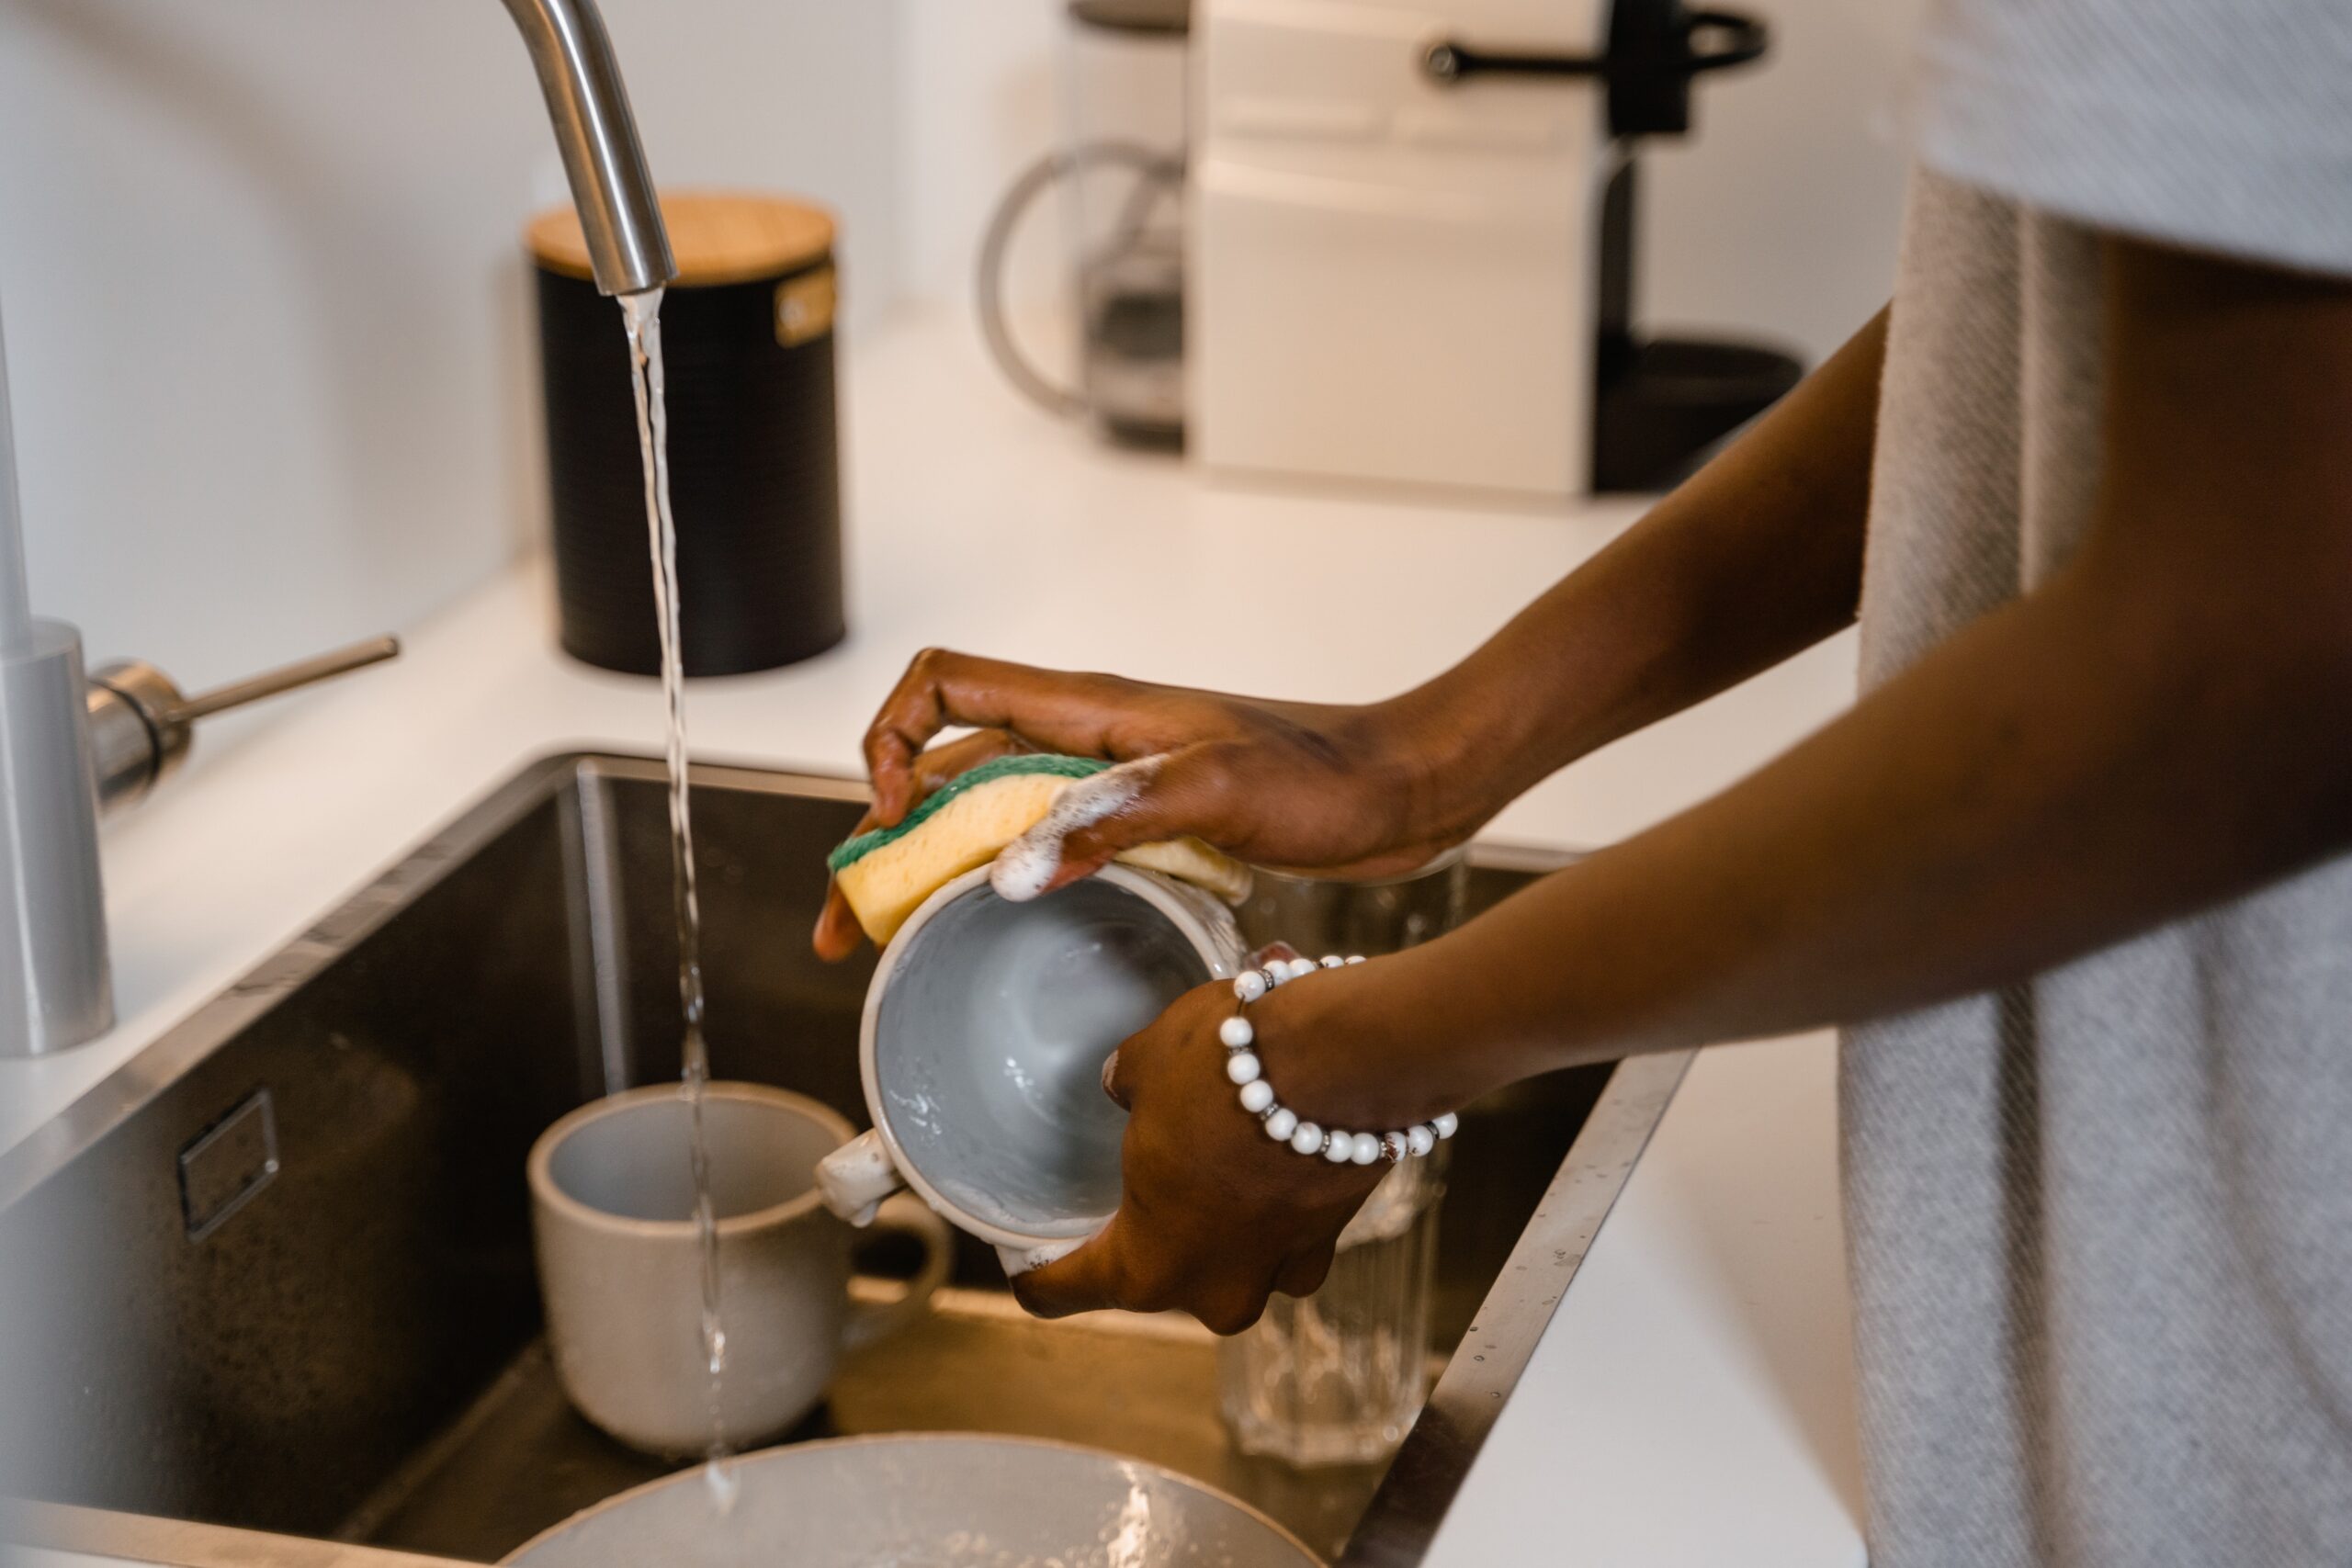 How to Hand Wash Dishes - Cleaning & Sanitizing Dishes By Hand